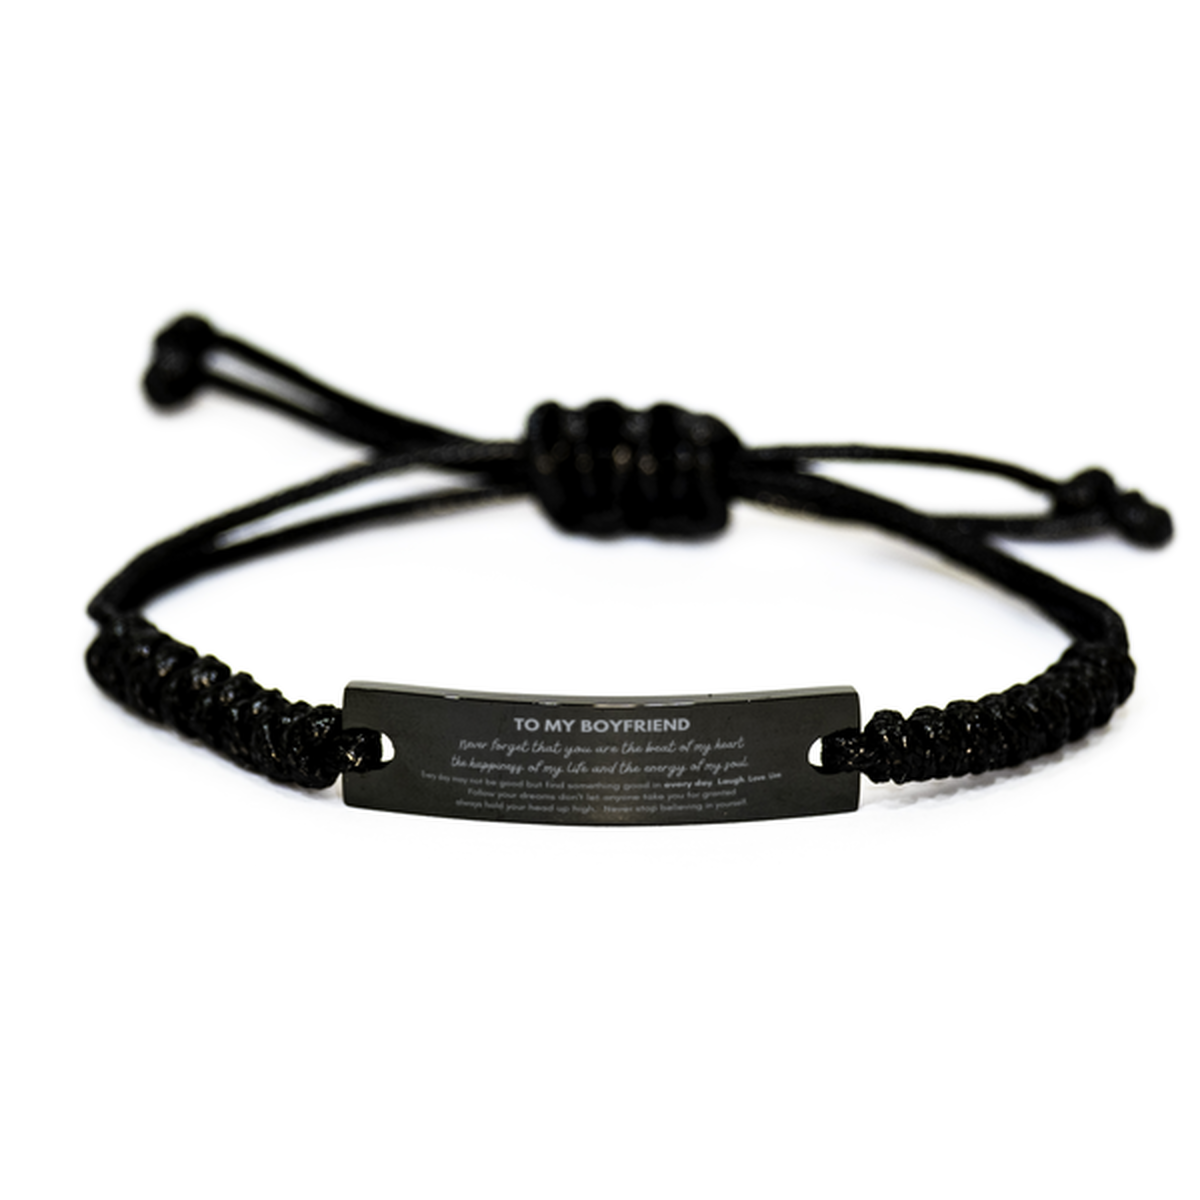 To My Boyfriend Bracelet Gifts, Christmas Boyfriend Black Rope Bracelet Present, Birthday Unique Motivational For Boyfriend, To My Boyfriend Never forget that you are the beat of my heart the happiness of my life and the energy of my soul